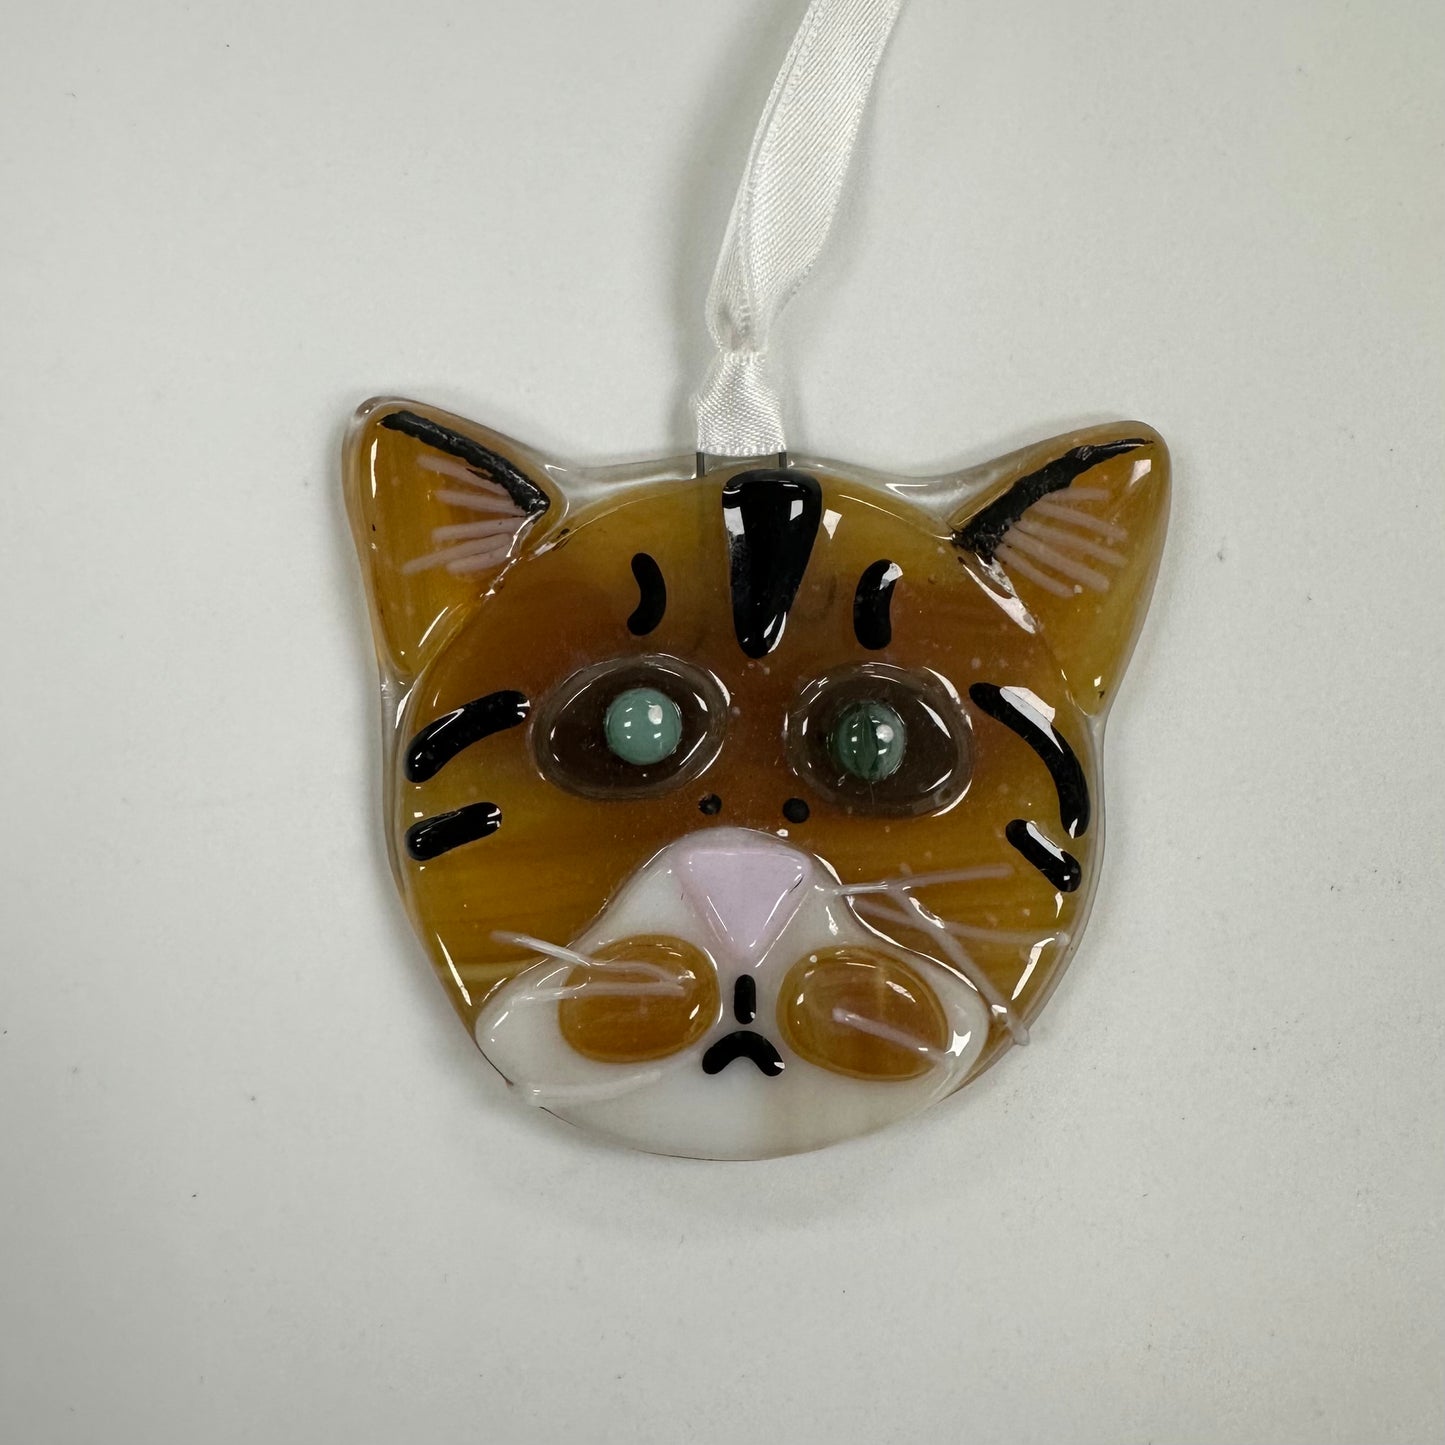 Fused glass pets!